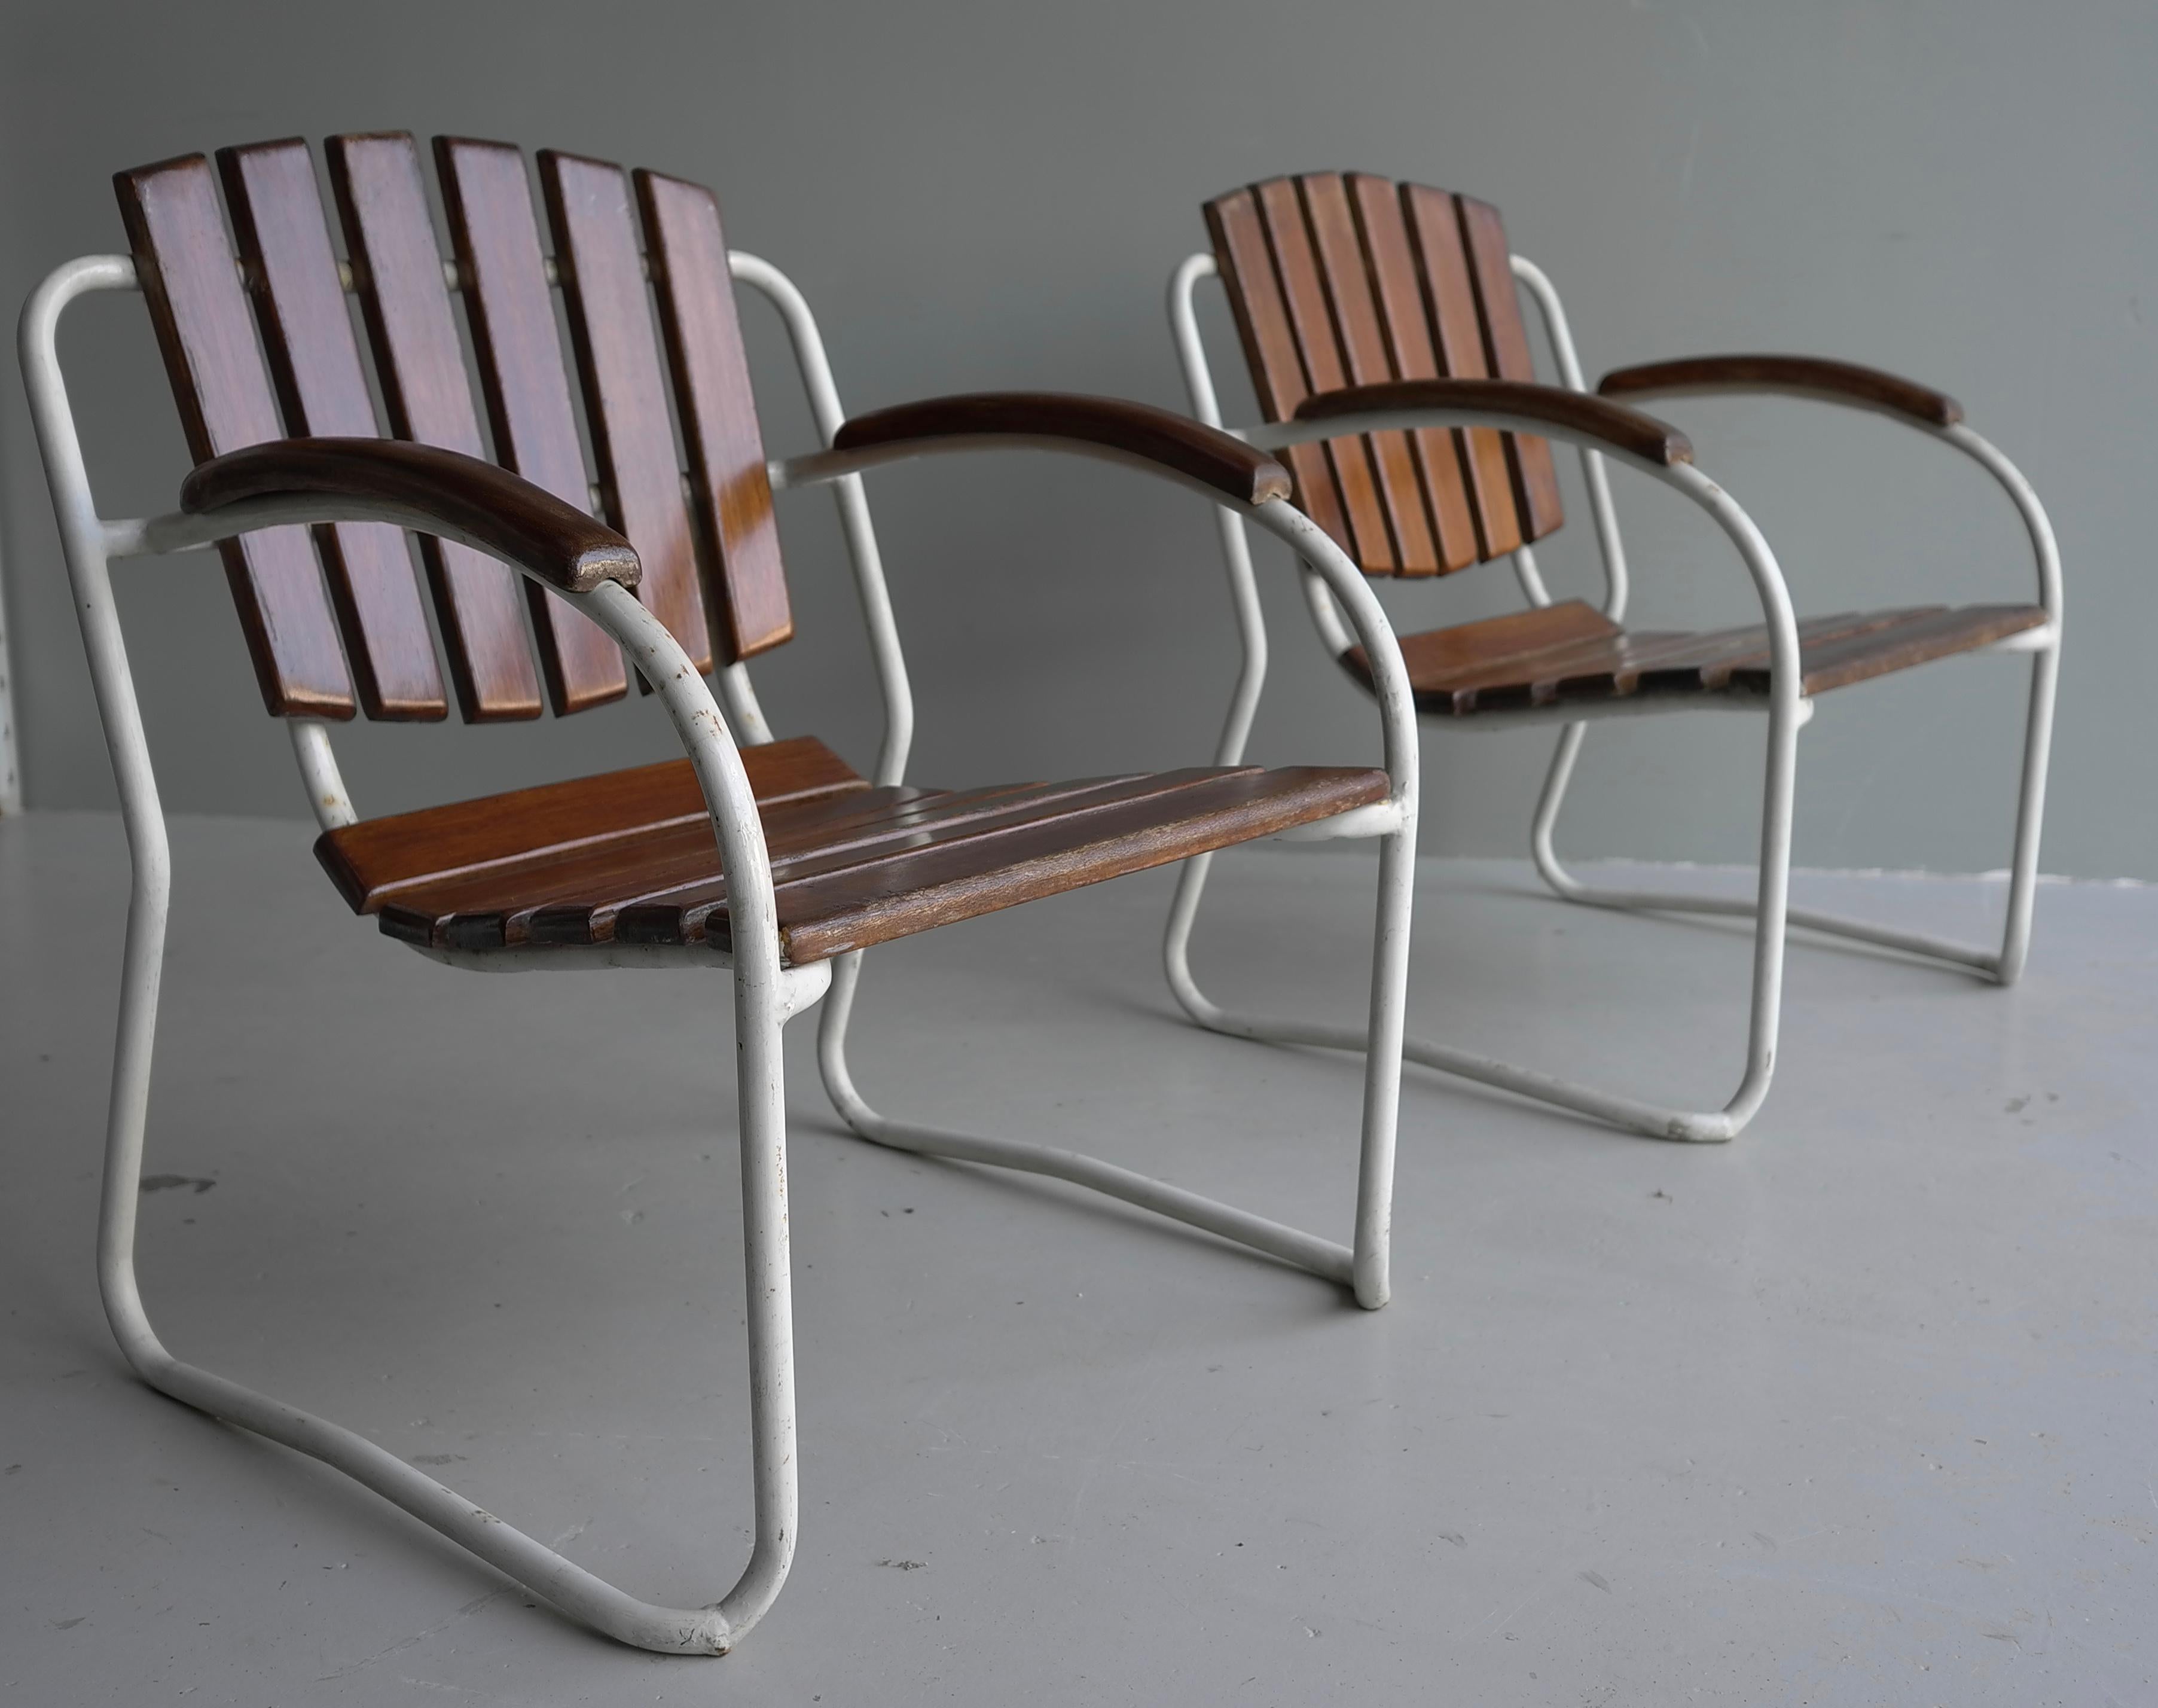 4x Tubular Frame and Slatwood Stackable Garden Chairs, 1930's For Sale 2